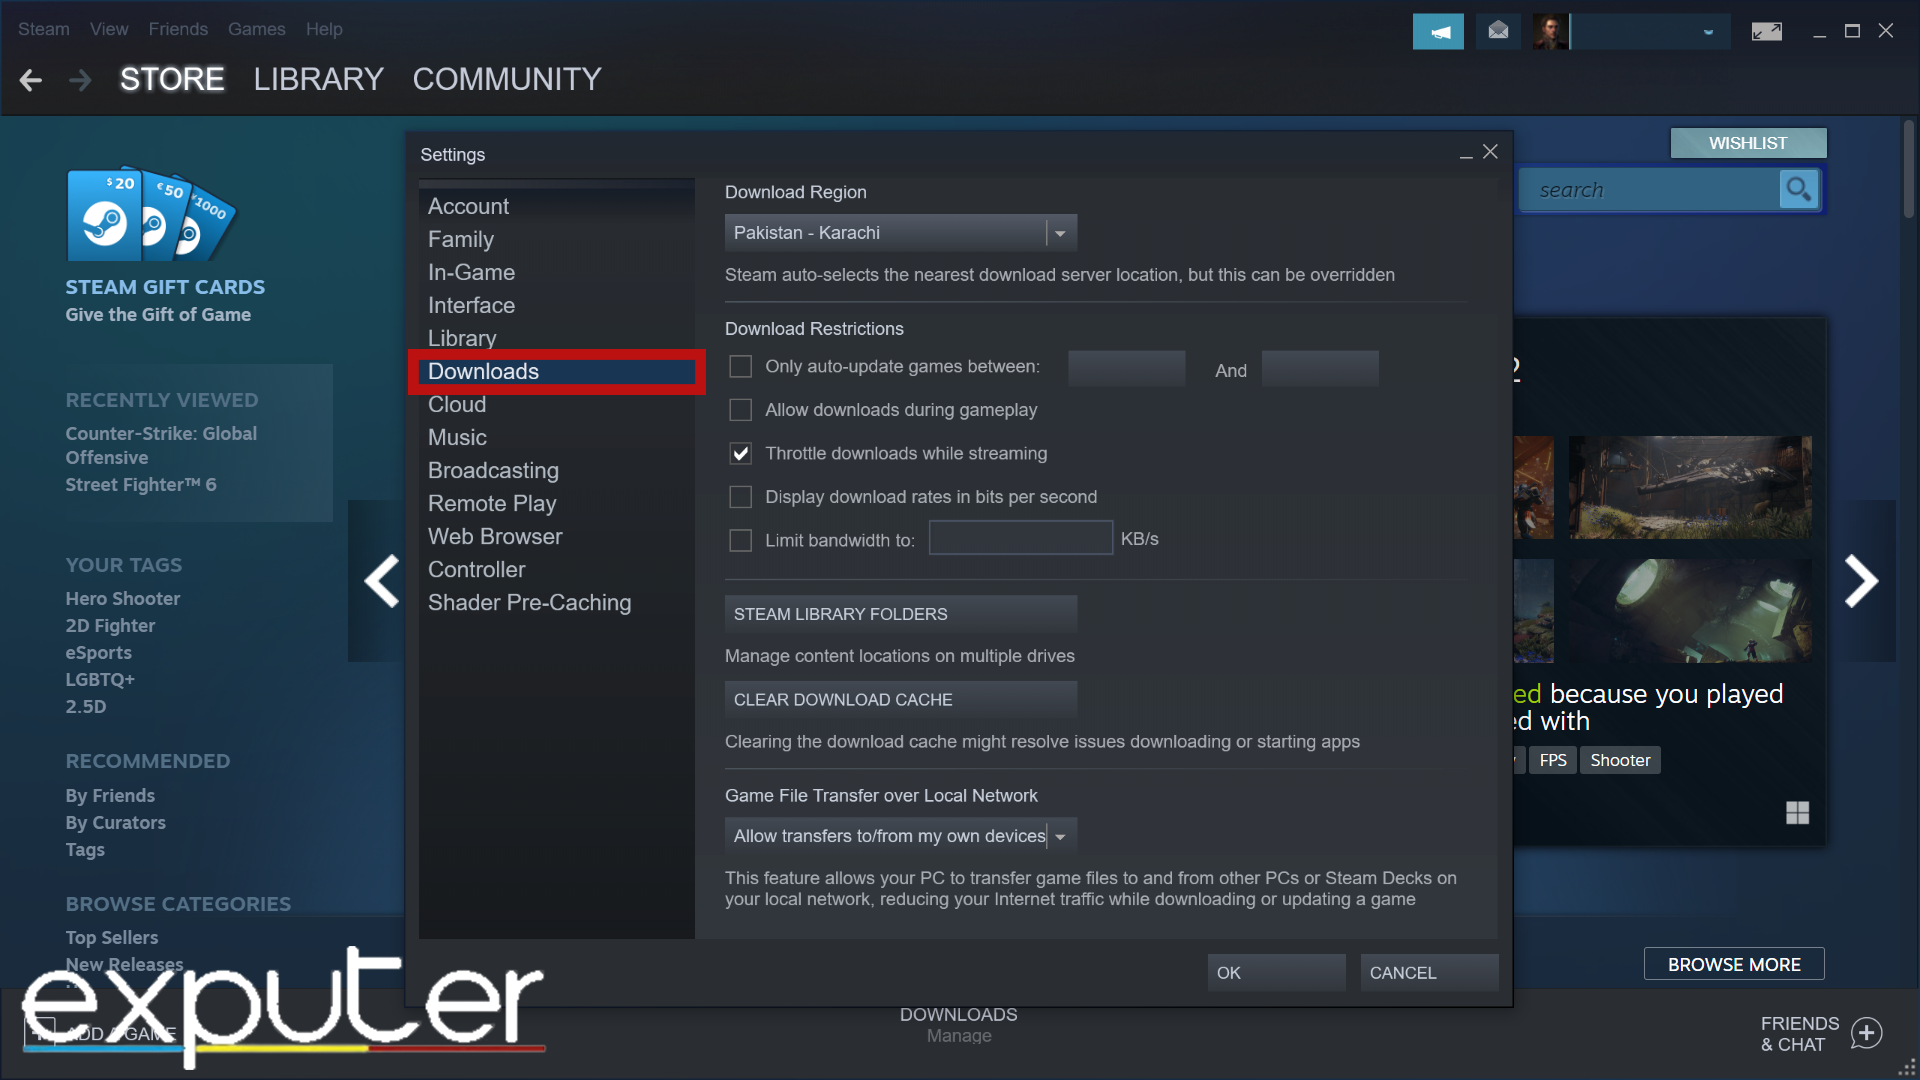 Going into the Download Settings. (image by eXputer)